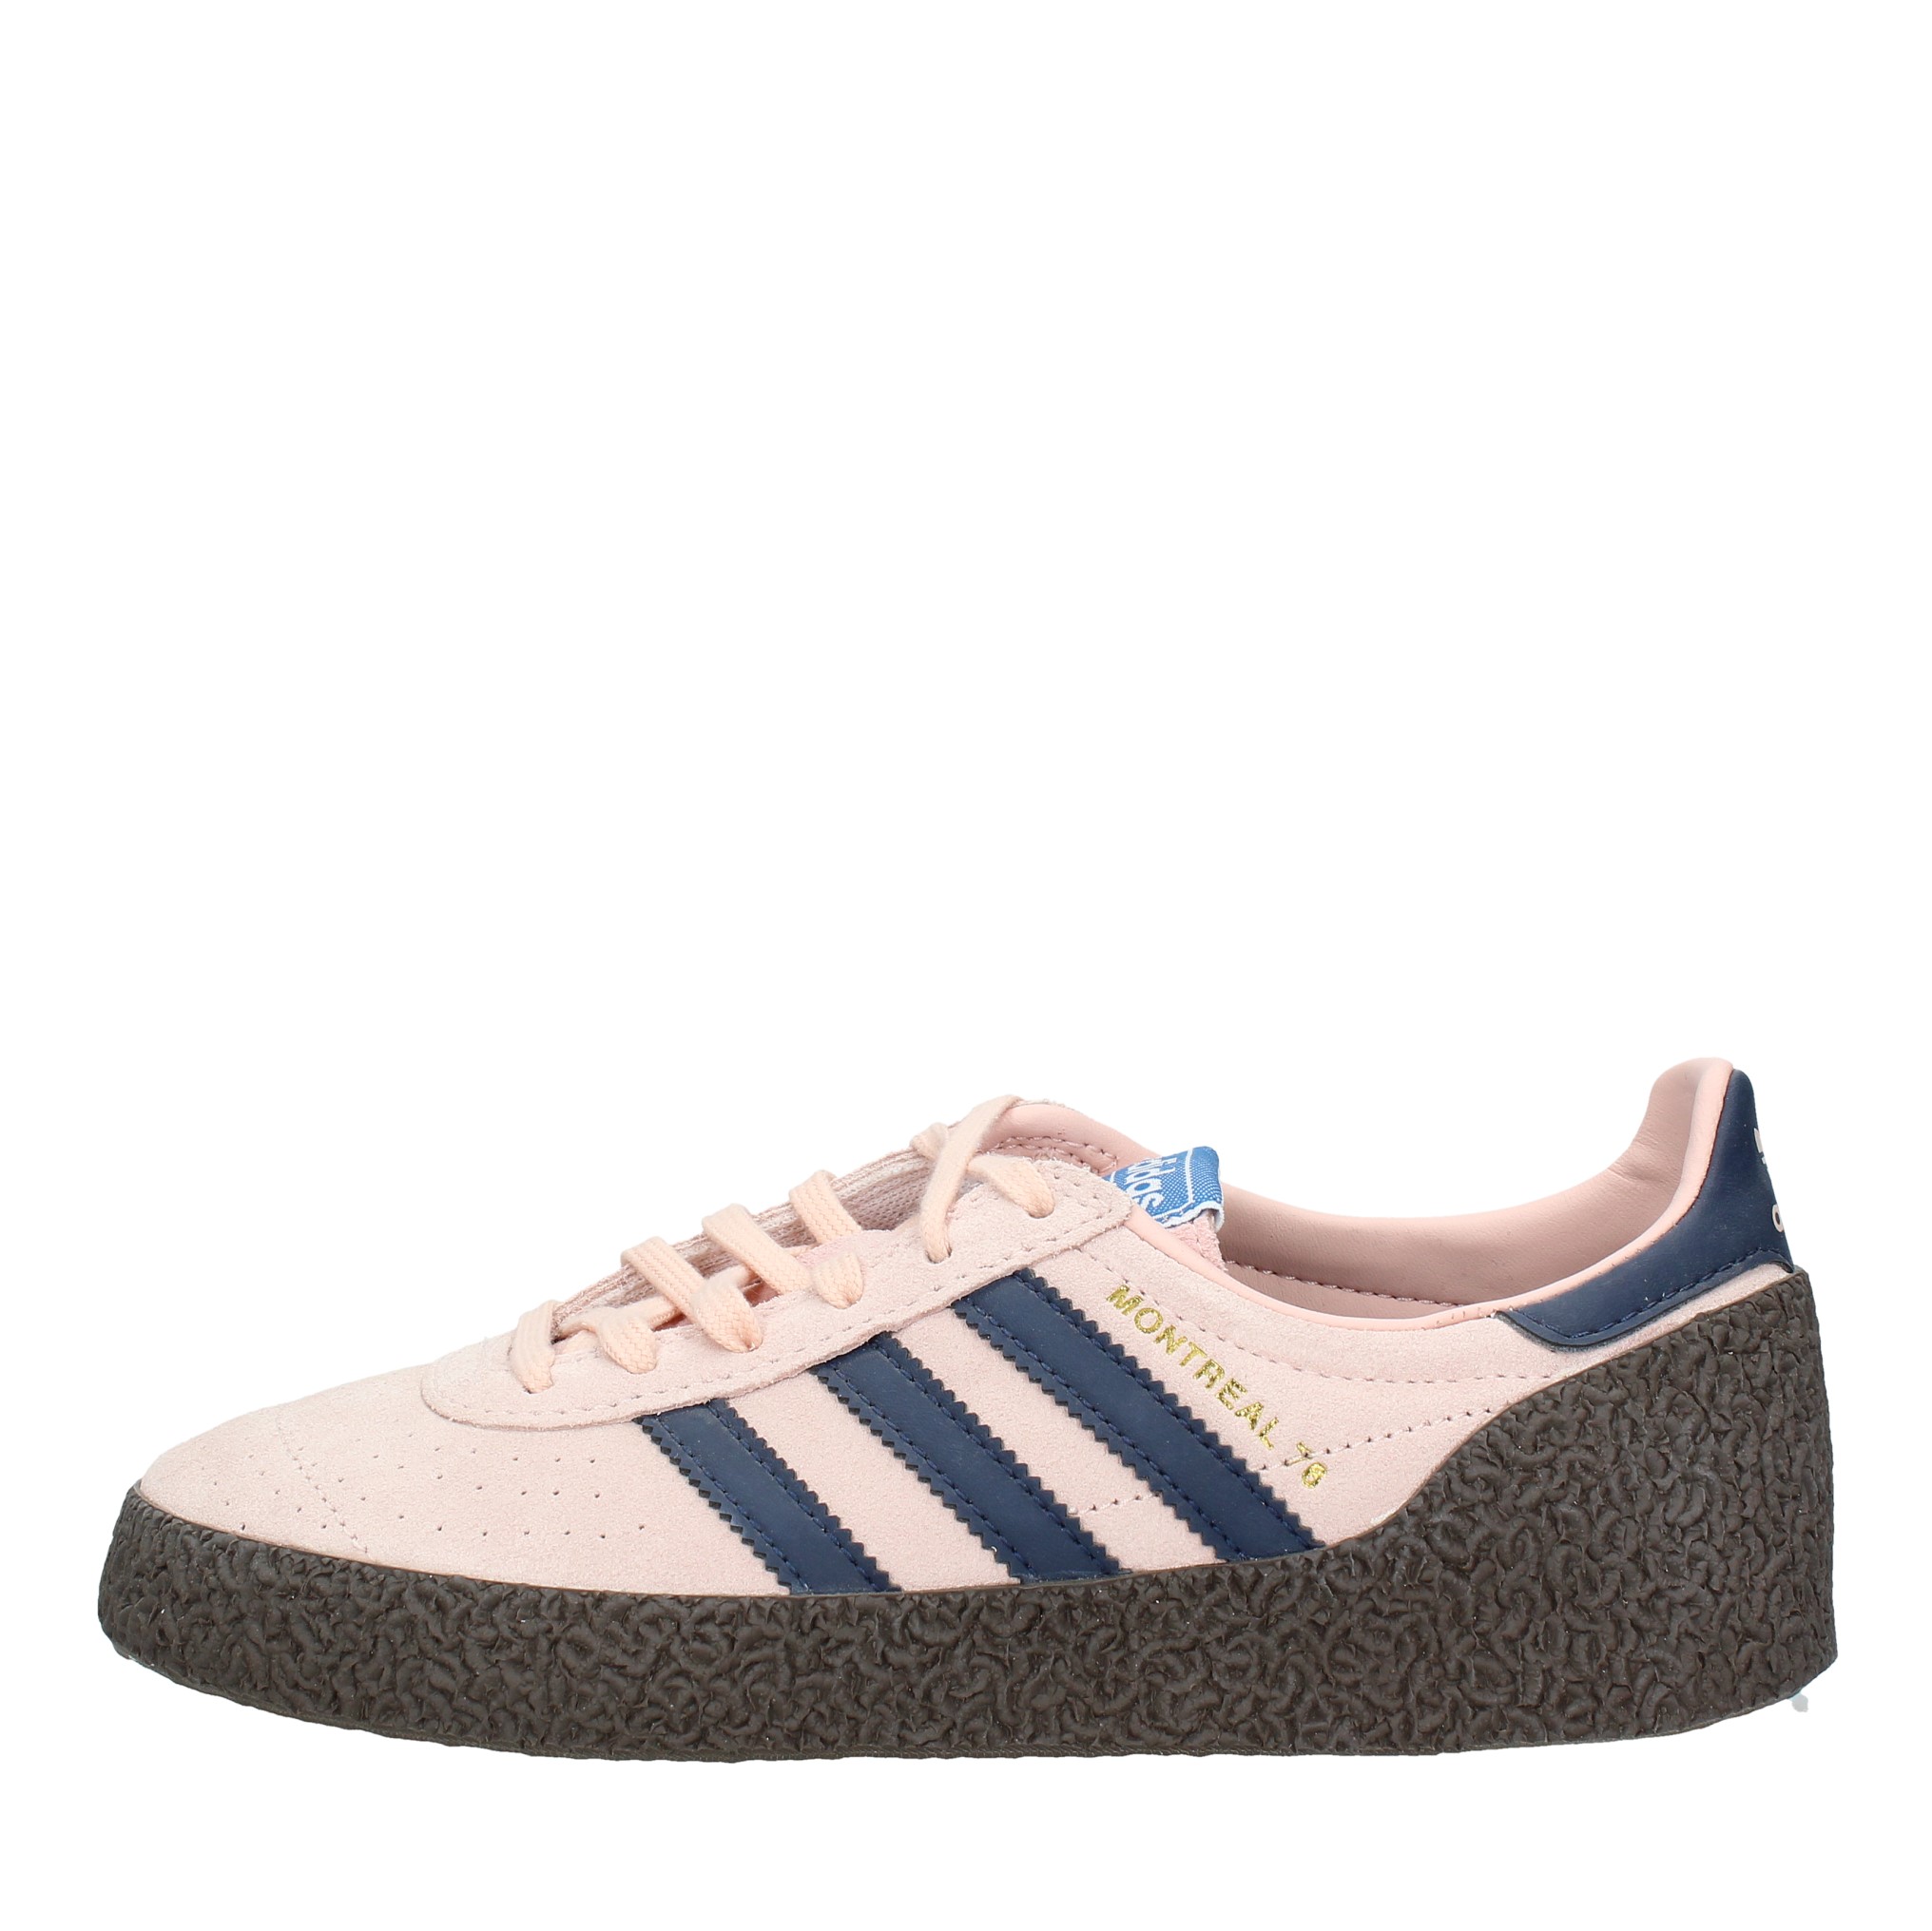 Suede sneakers. - ADIDAS - Ginevra calzature